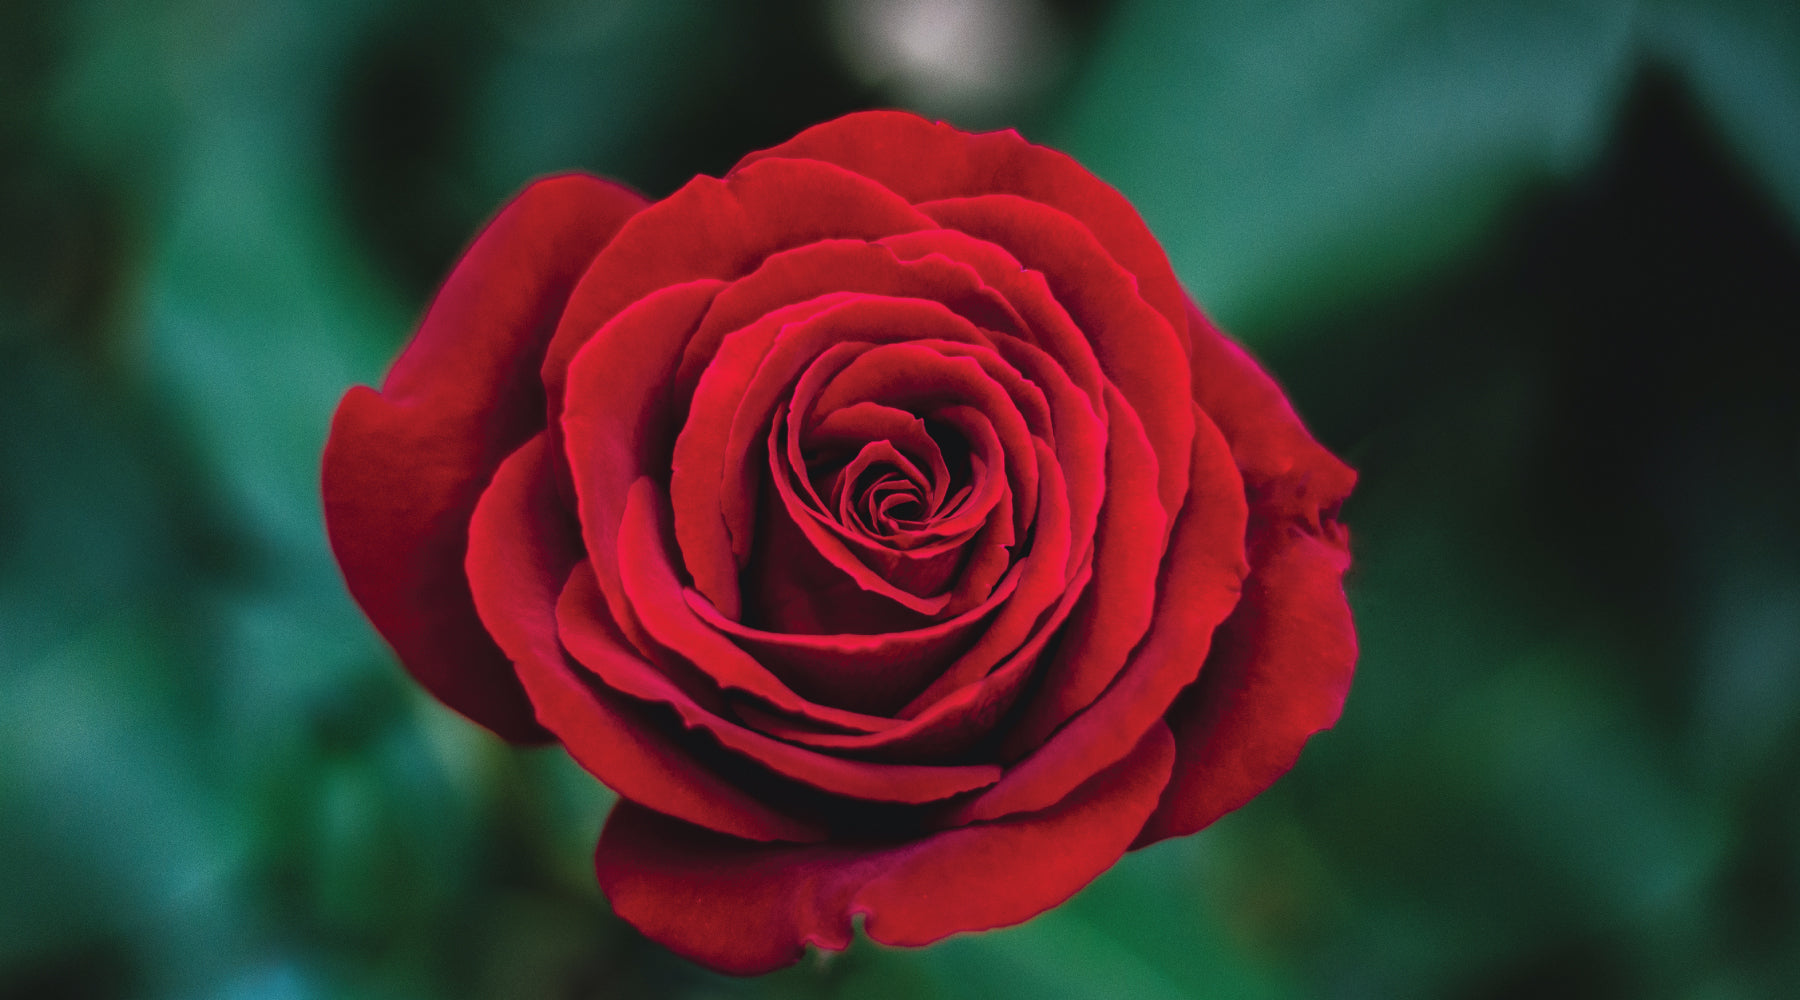 Red roses remain top choice on Valentine’s Day